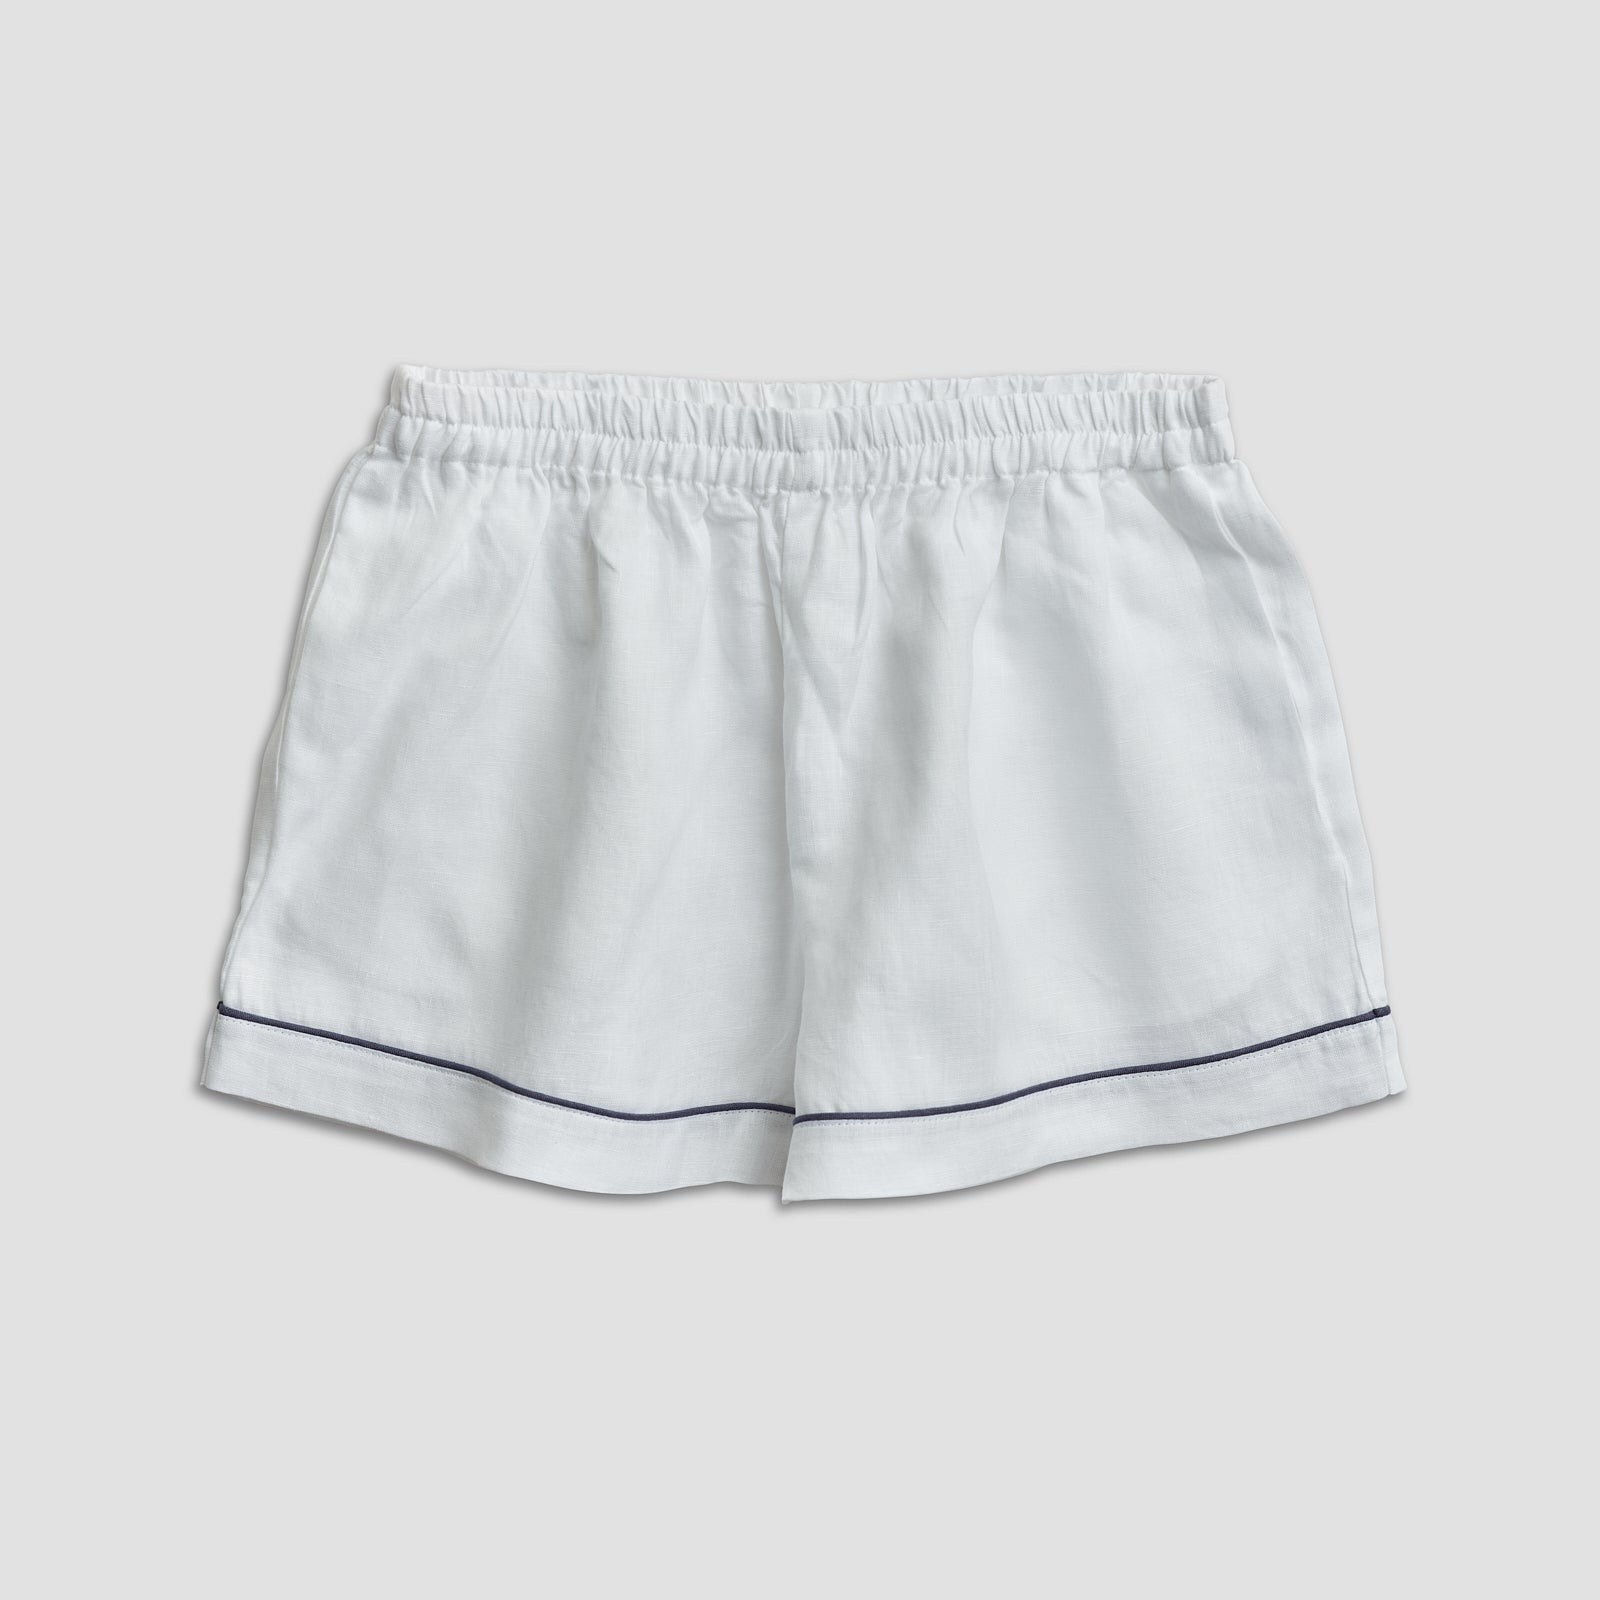 White Linen Pajama Shorts Set - Piglet in Bed